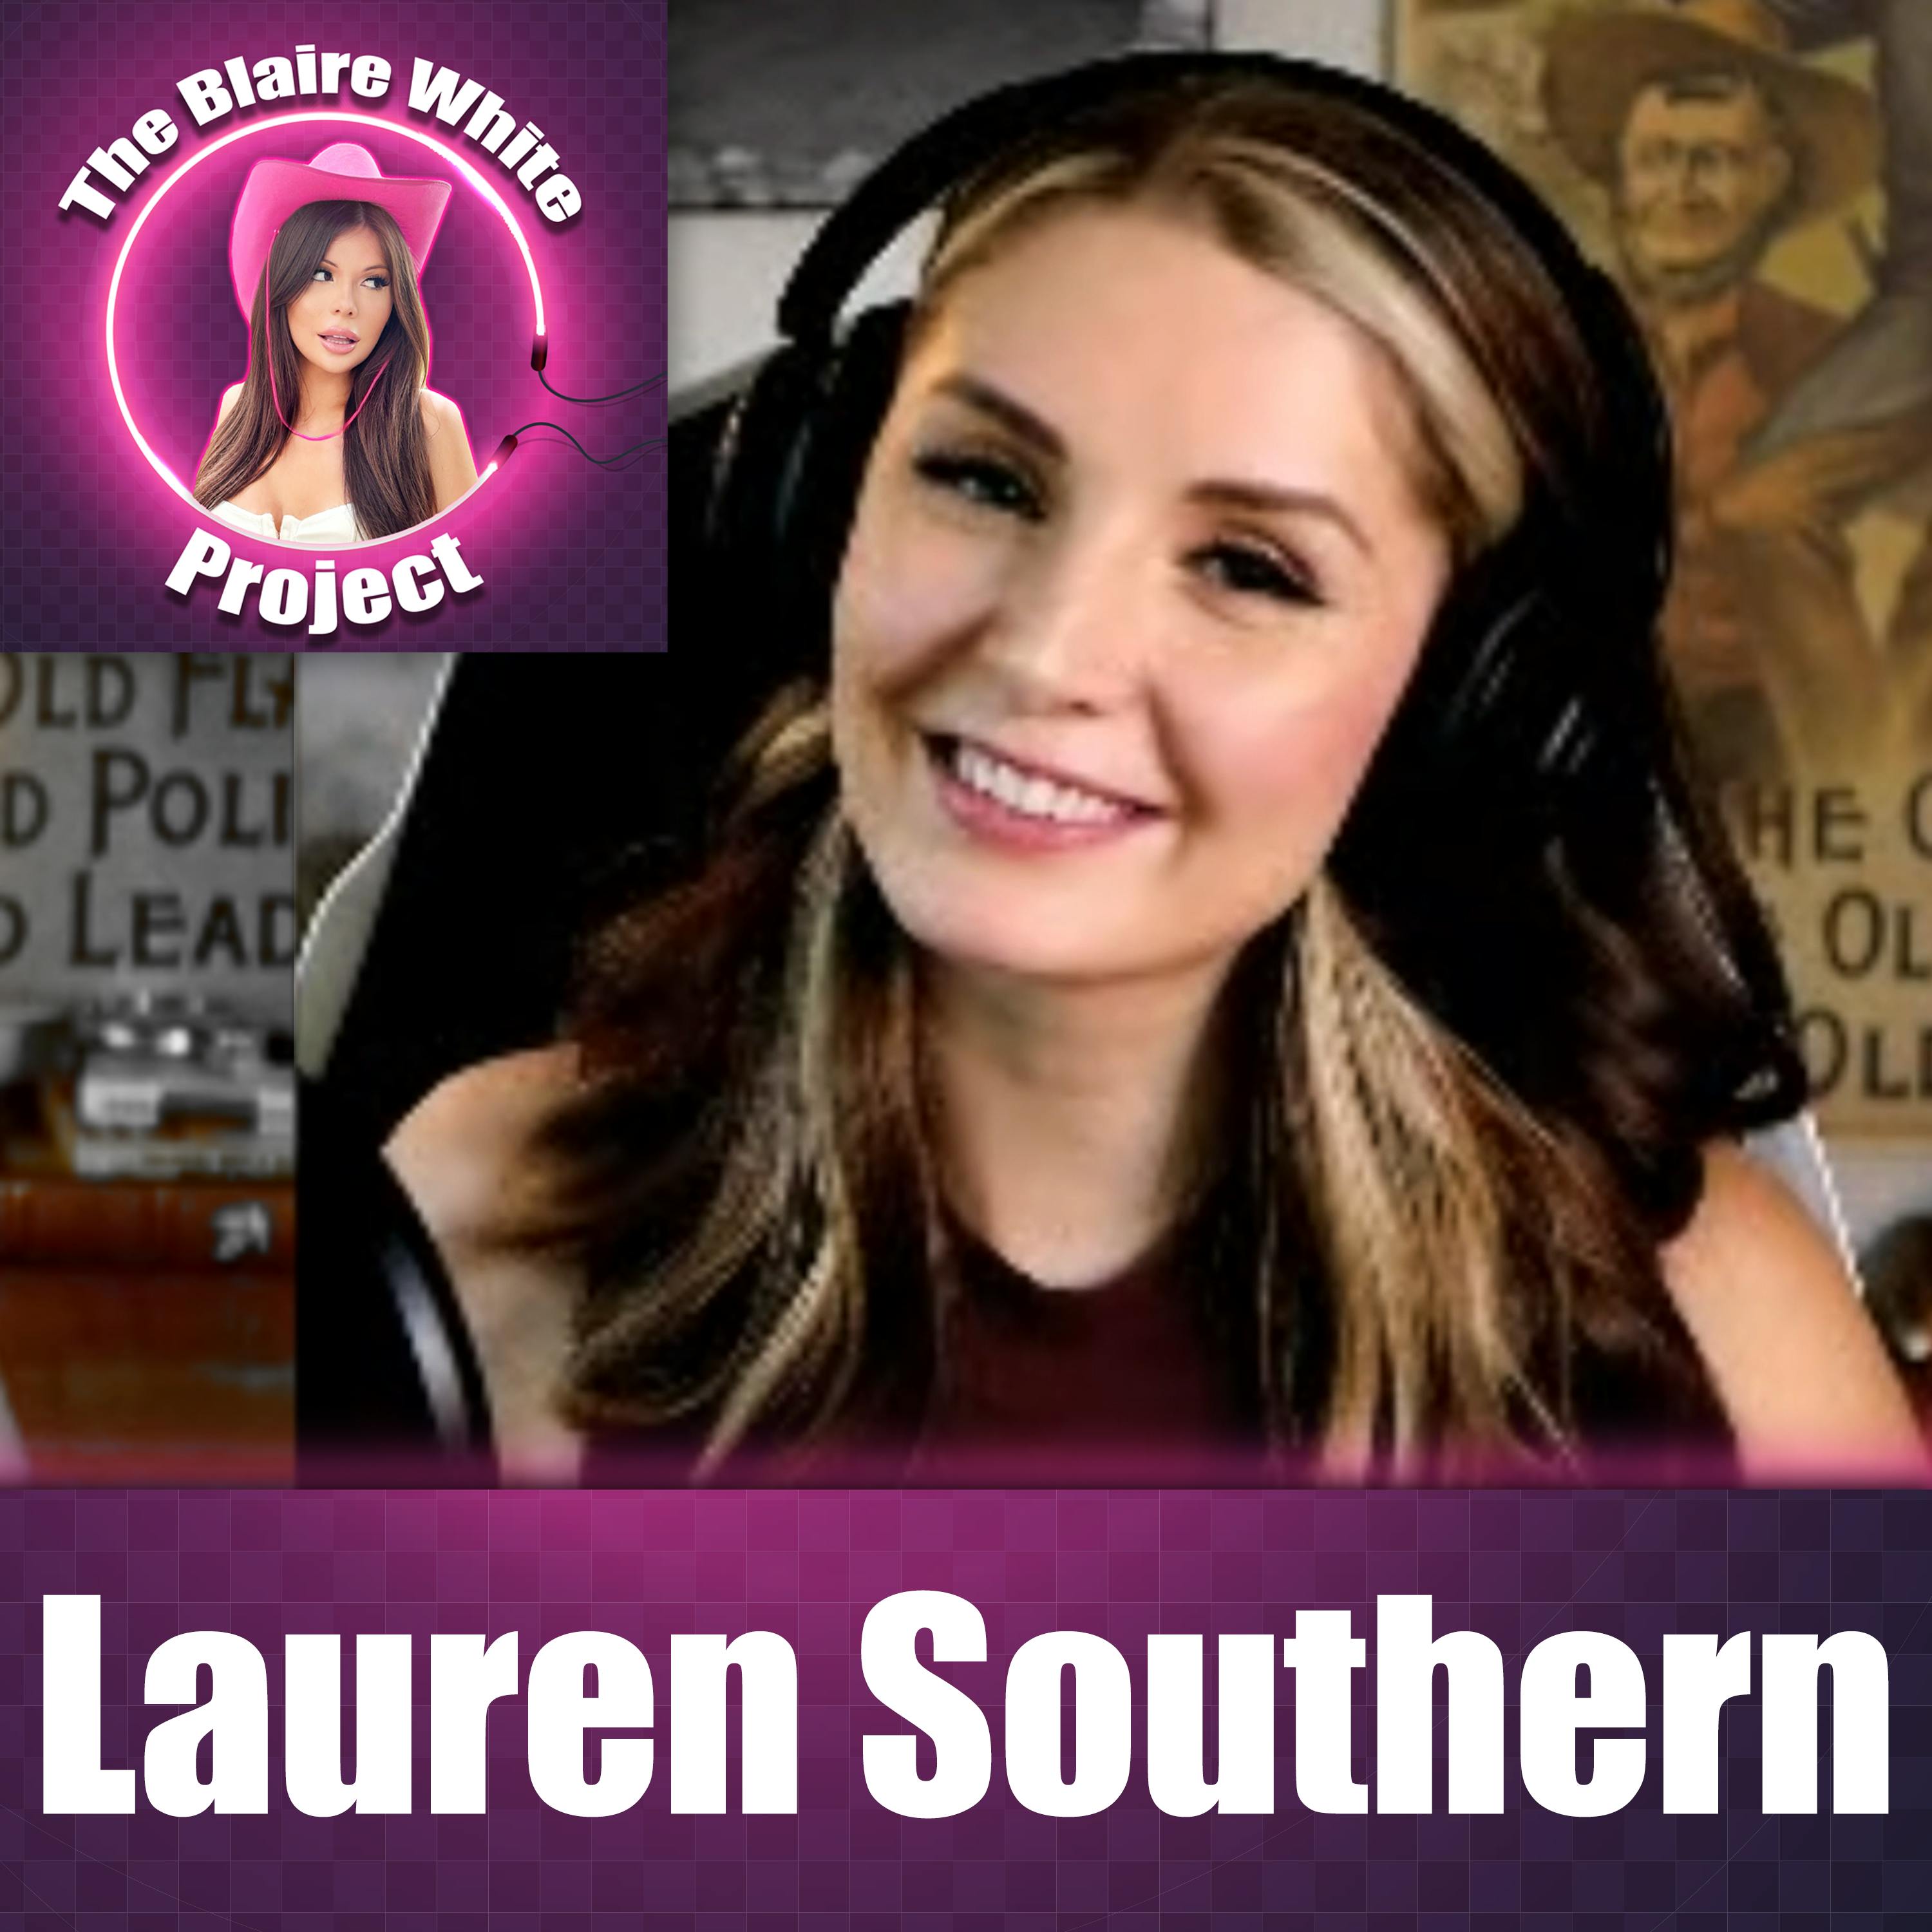 Lauren Southern: Why She Left The Internet, Her Side of The Controversies, & Canadian vs American Politics